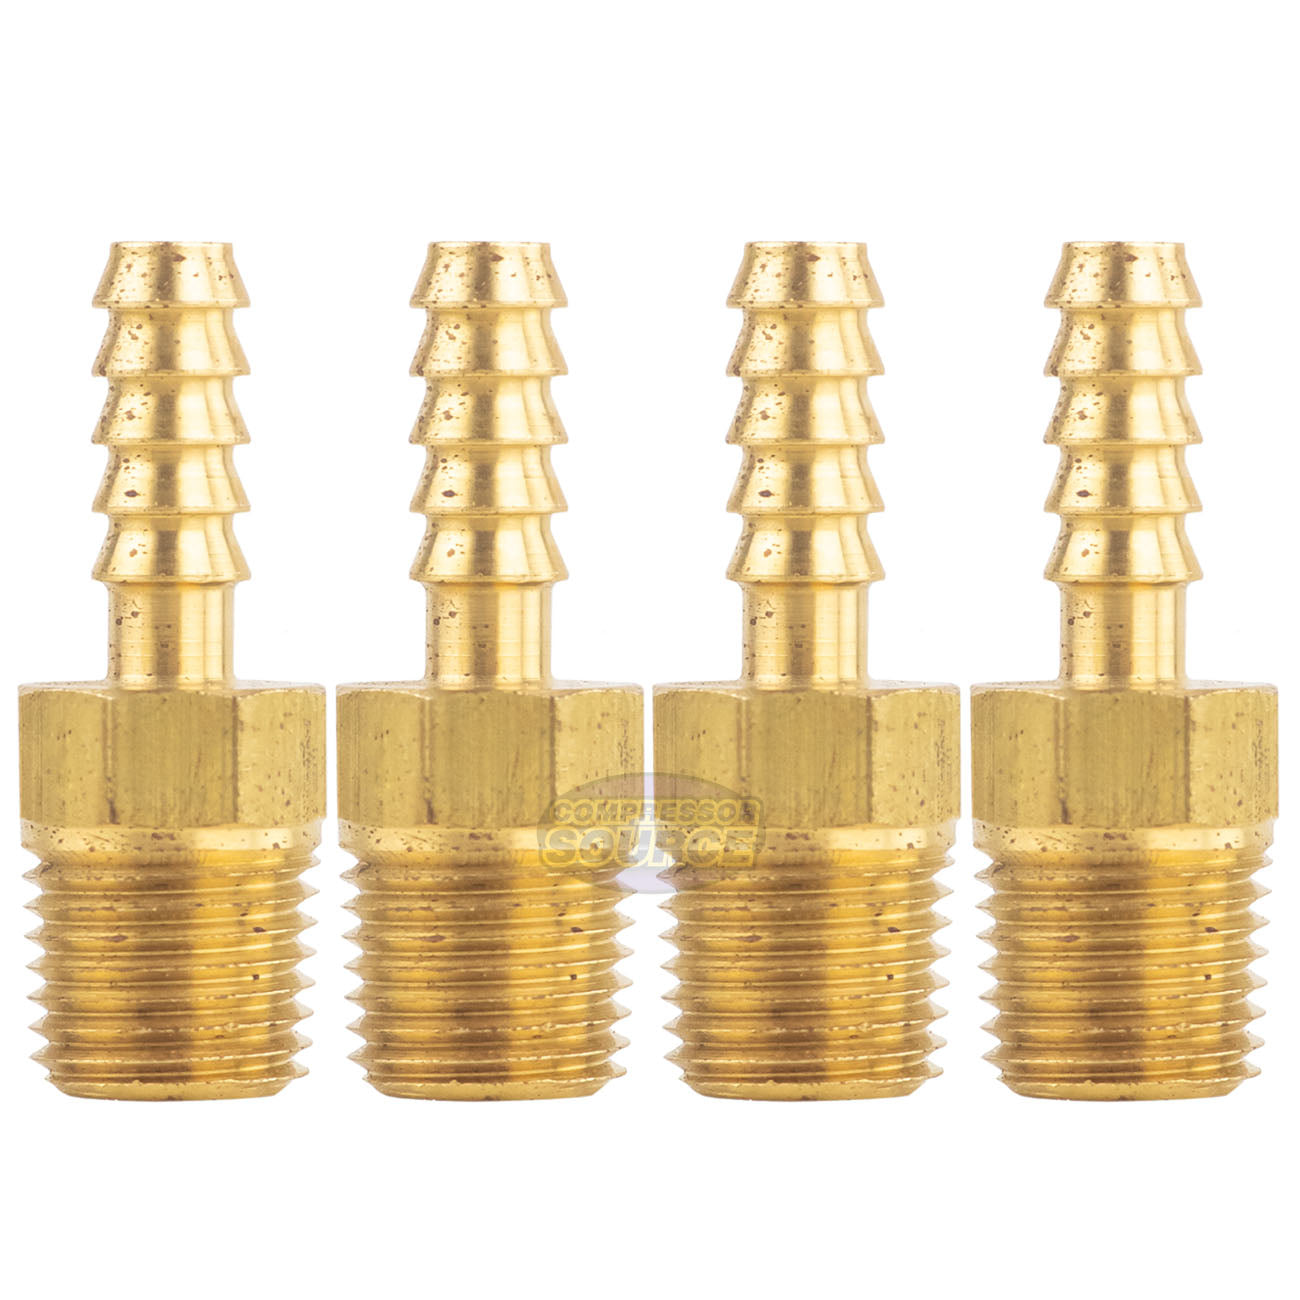 Brass Hose Barbs 1/4" Male NPT for 1/4" ID Hoses Barbed Fitting Air Fuel 4 Pack